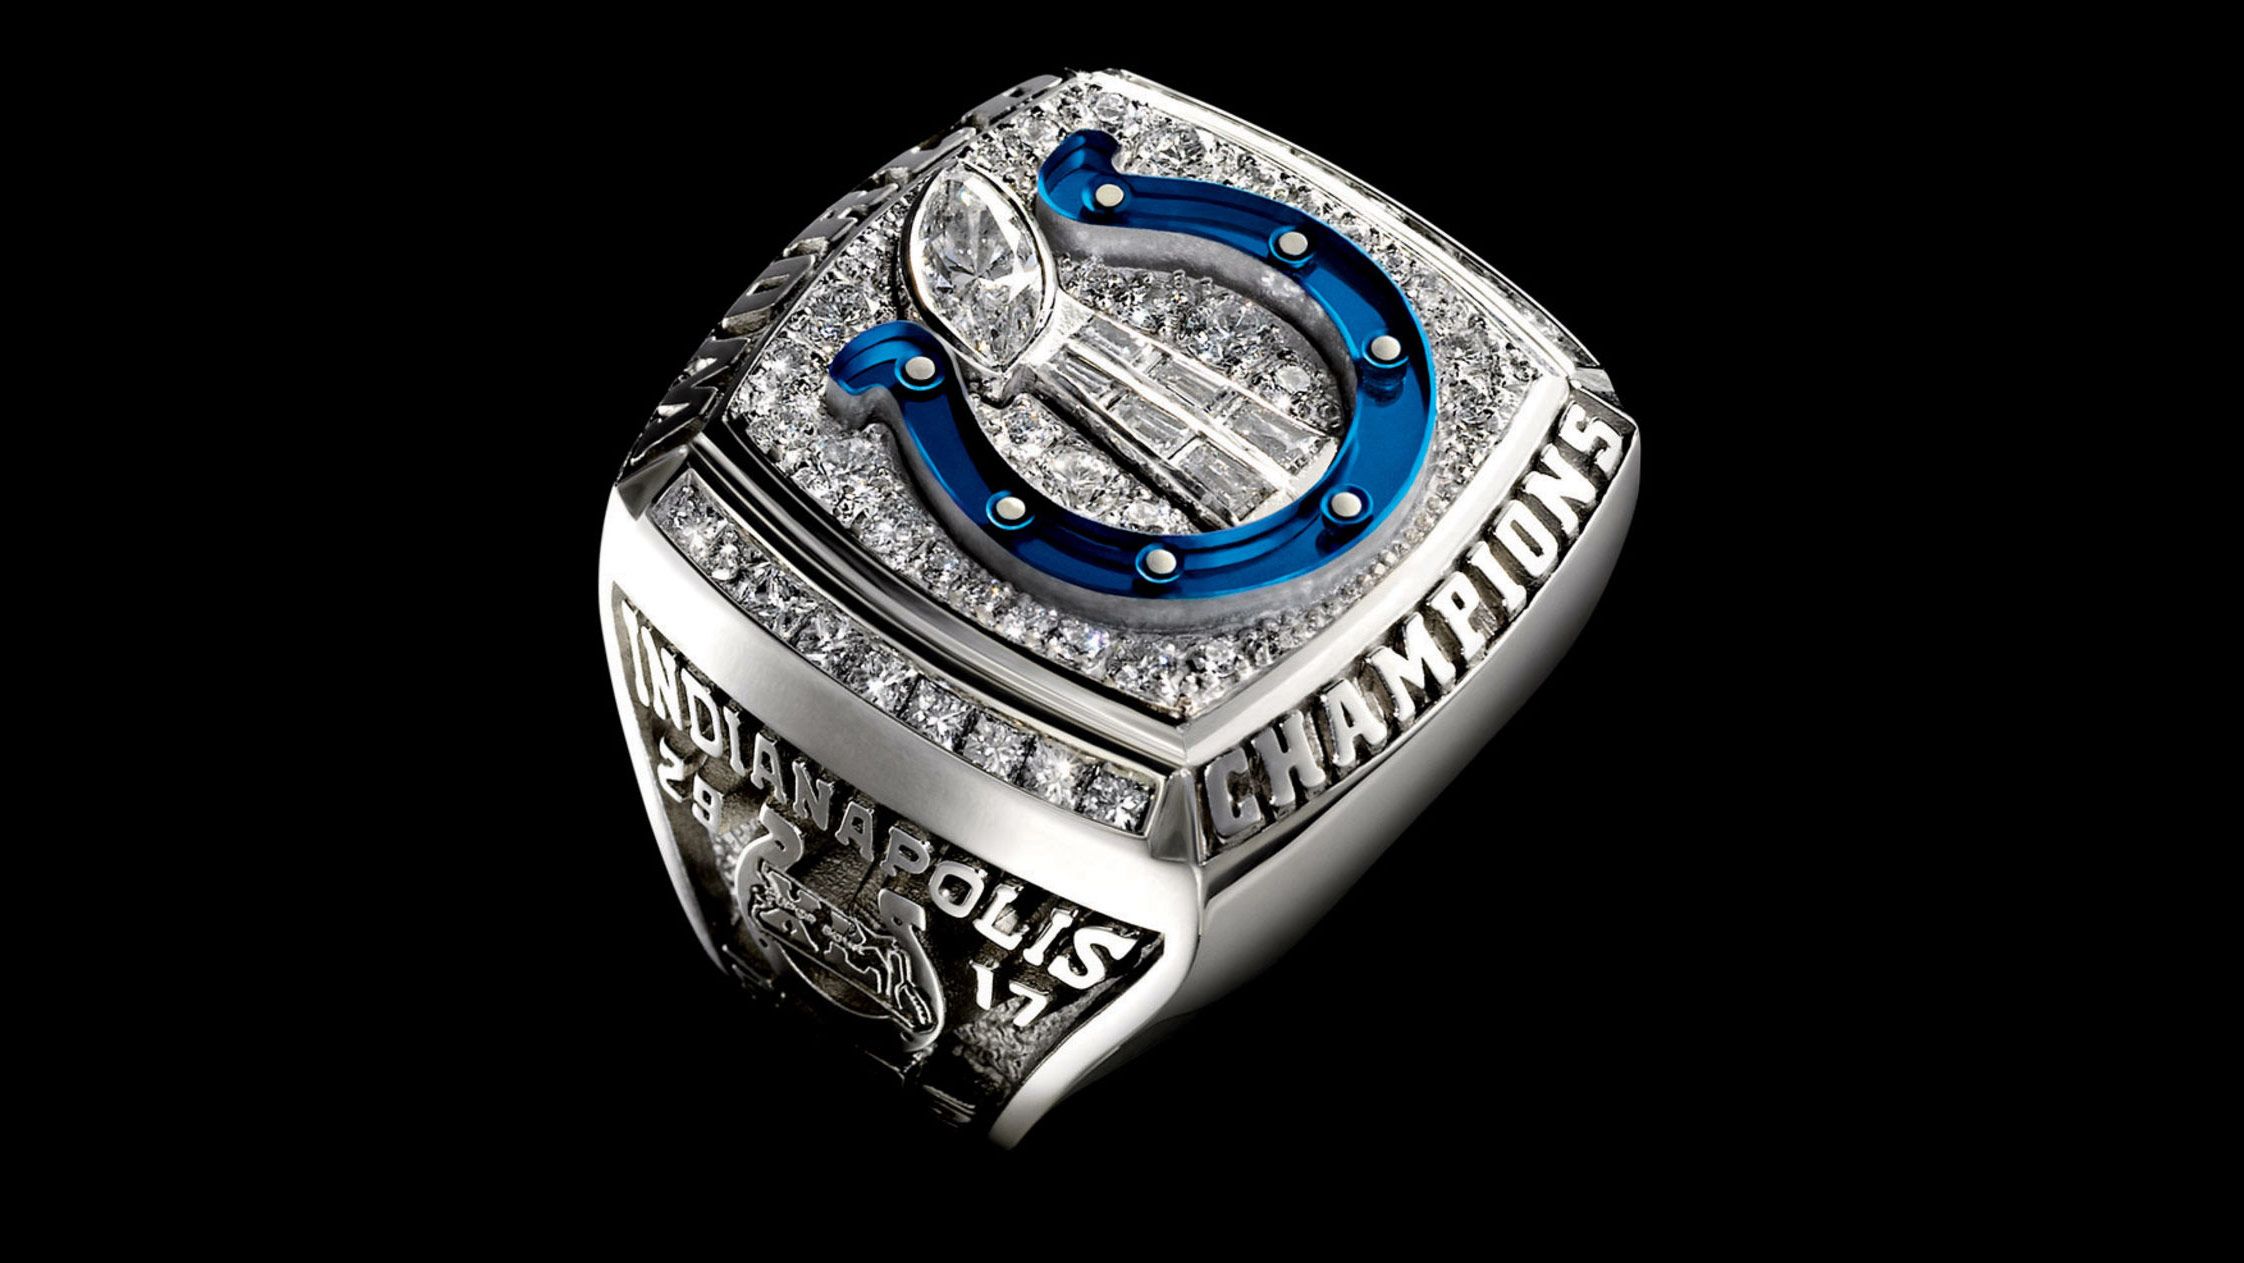 The Super Bowl Rings